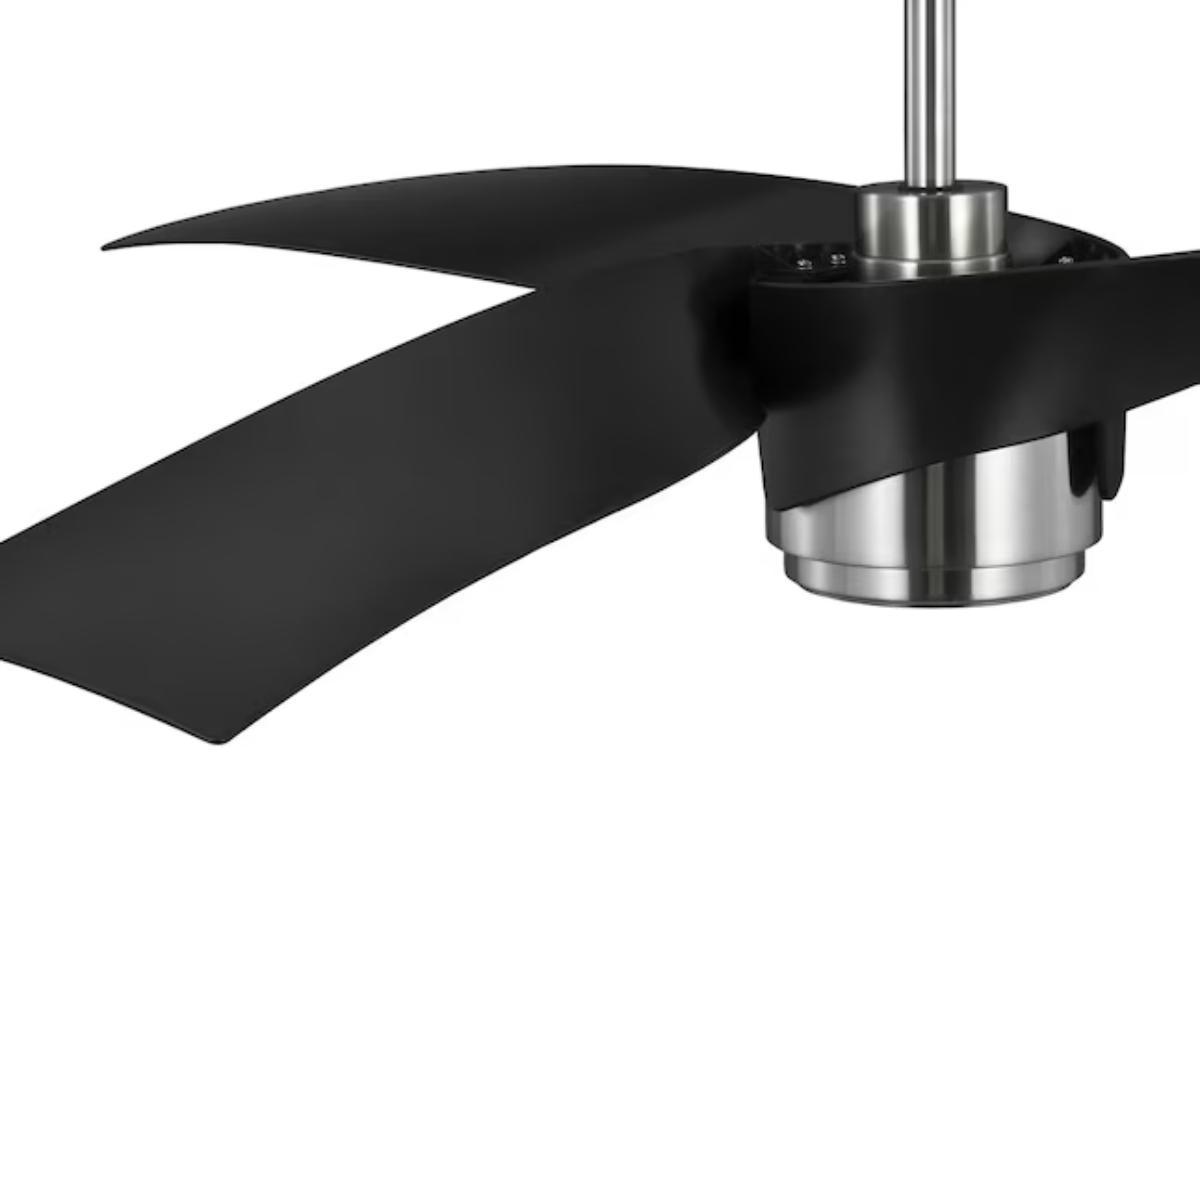 Insigna 60 Inch LED Ceiling Fan with Light Kit and Remote, Brushed Nickel with Matte Black Blades - Bees Lighting